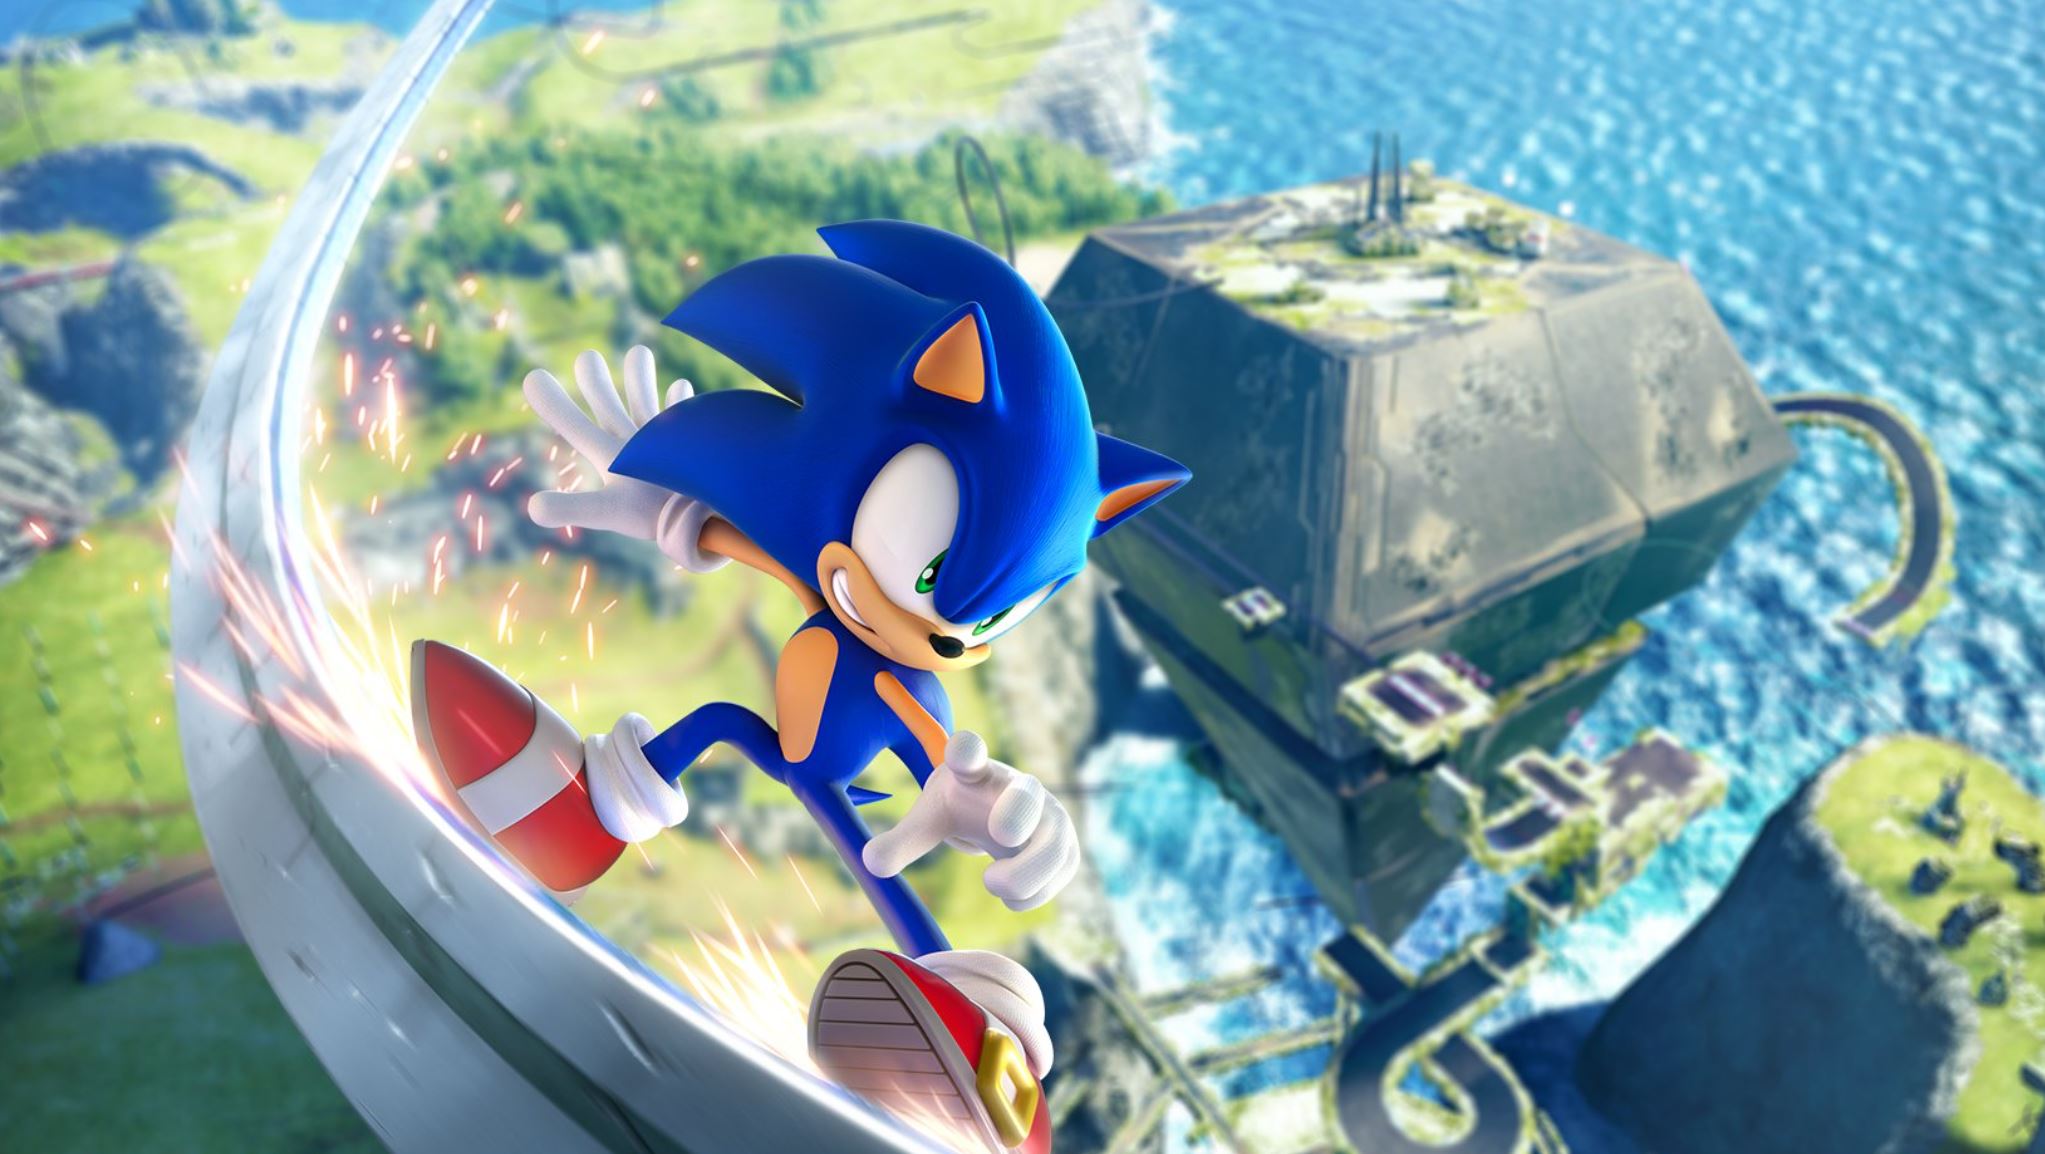 sonic frontiers delayed